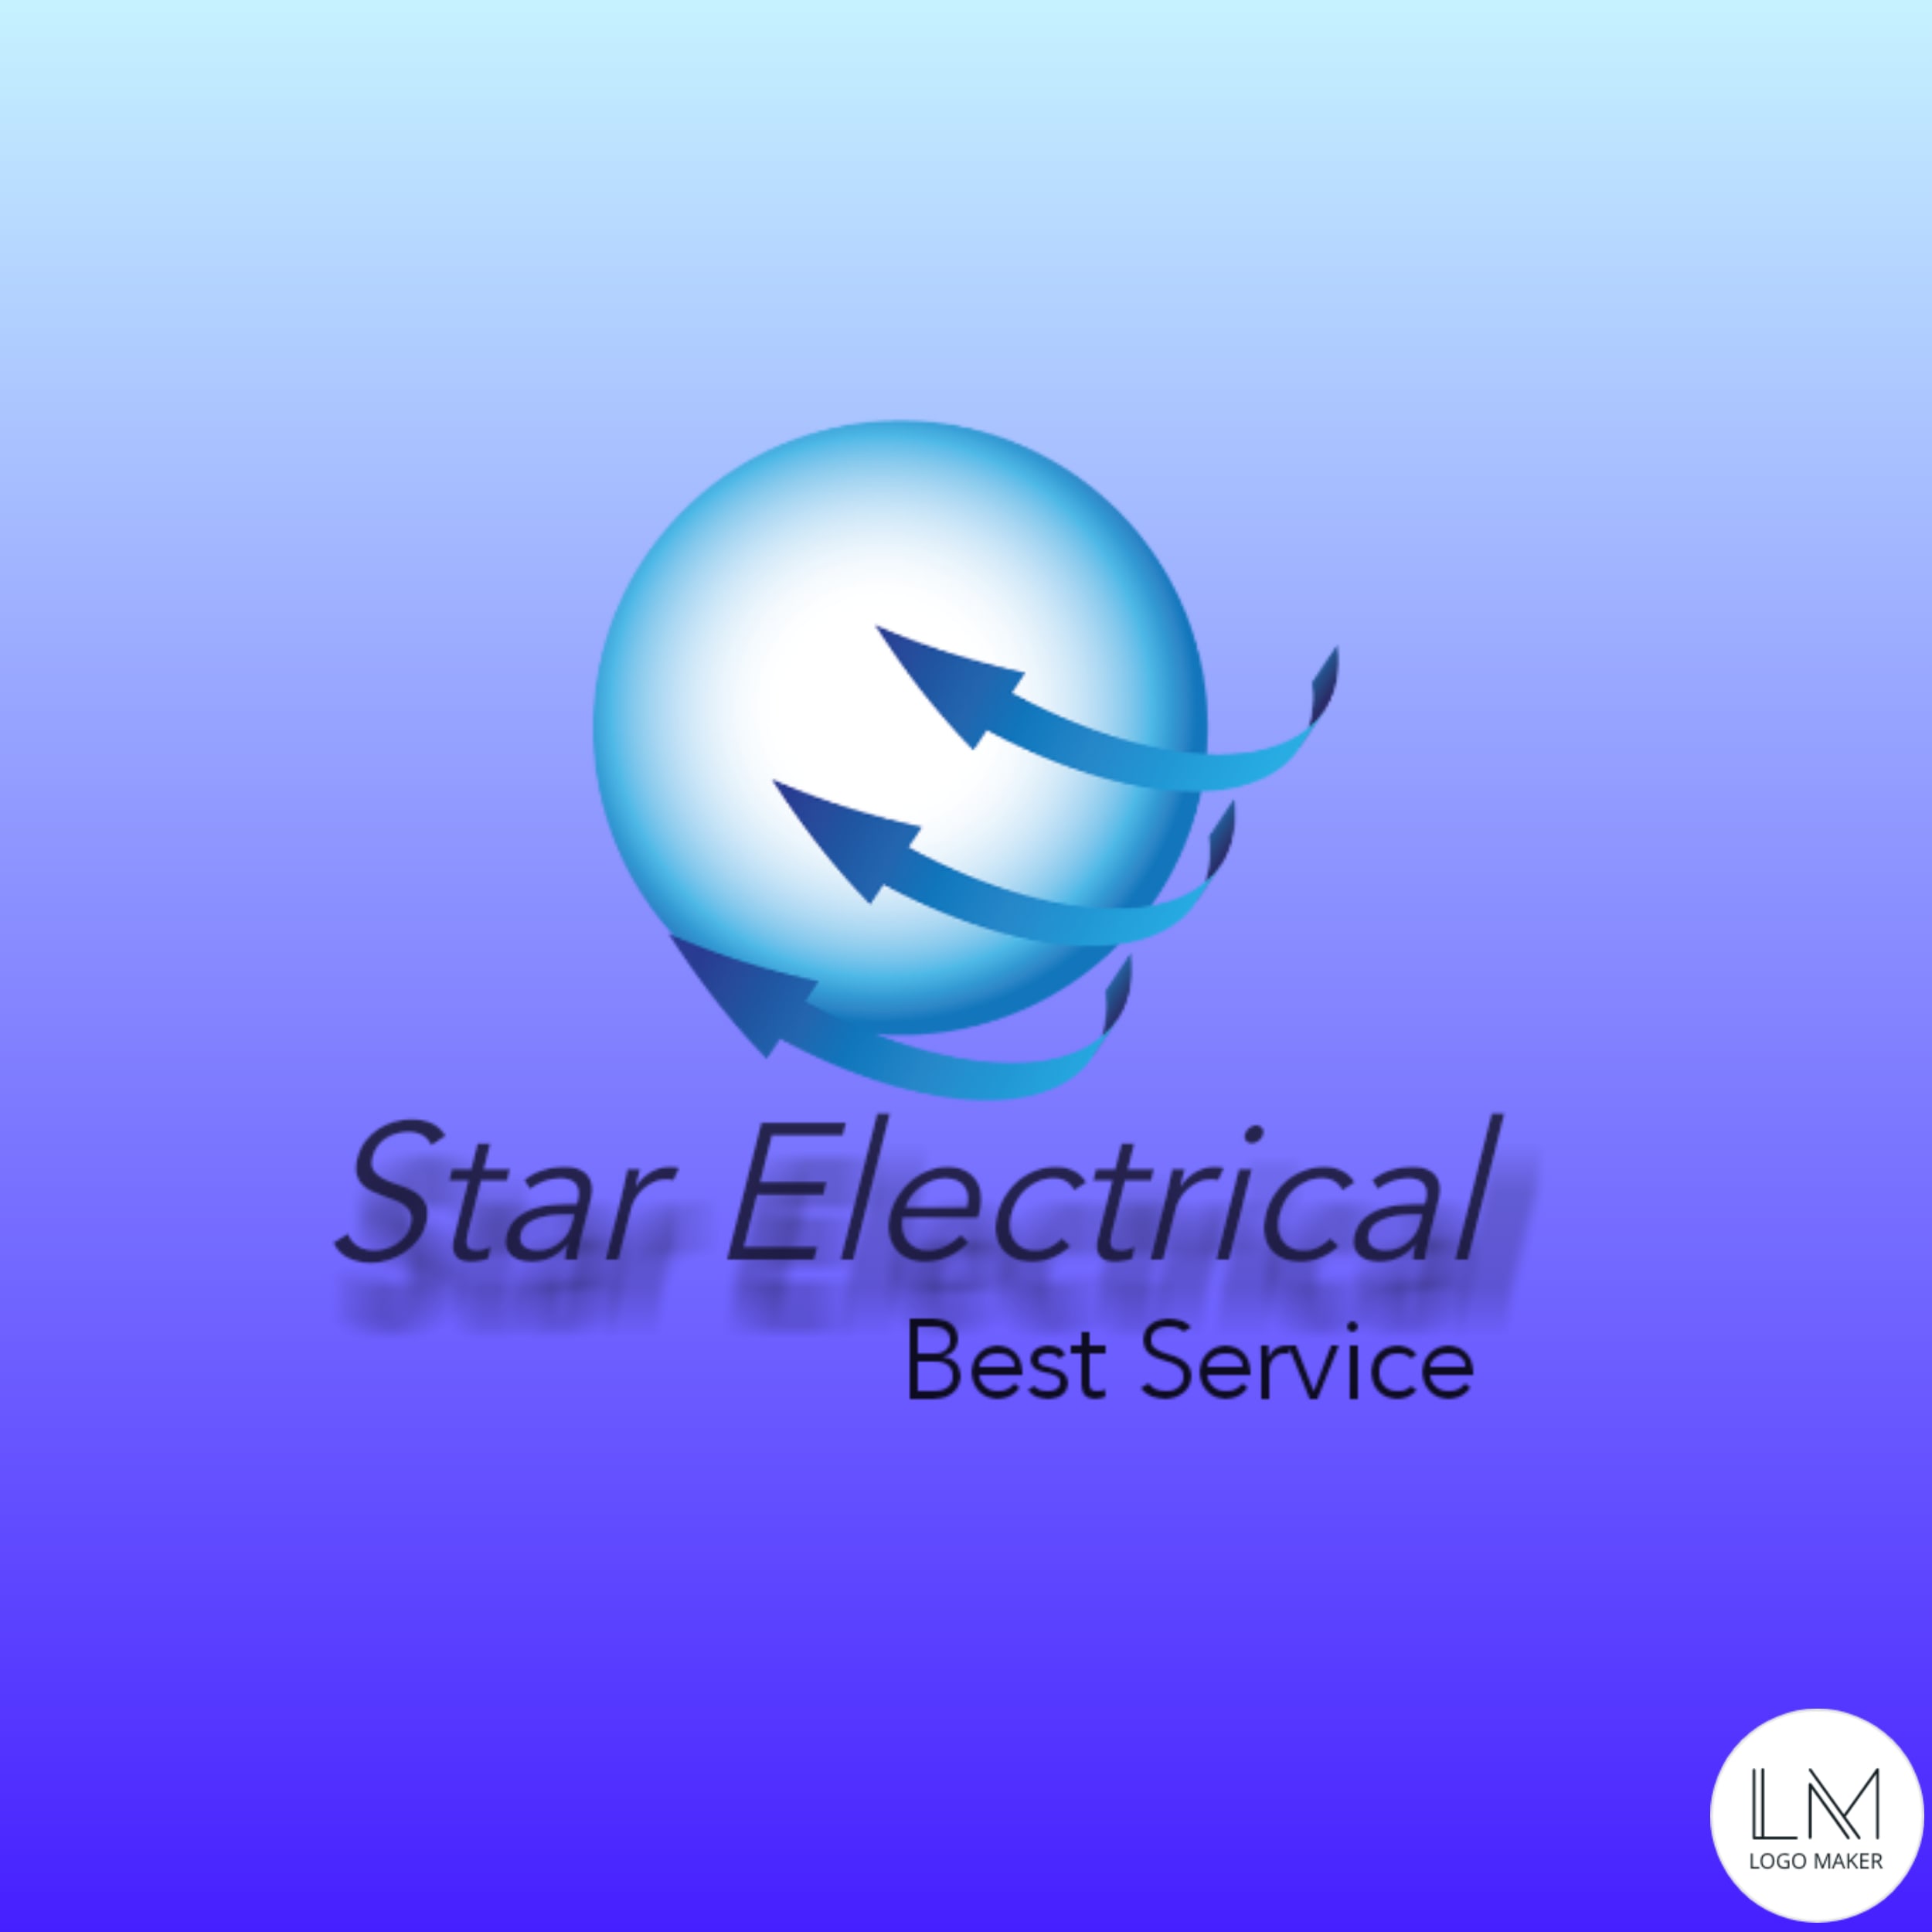 Star Electrical